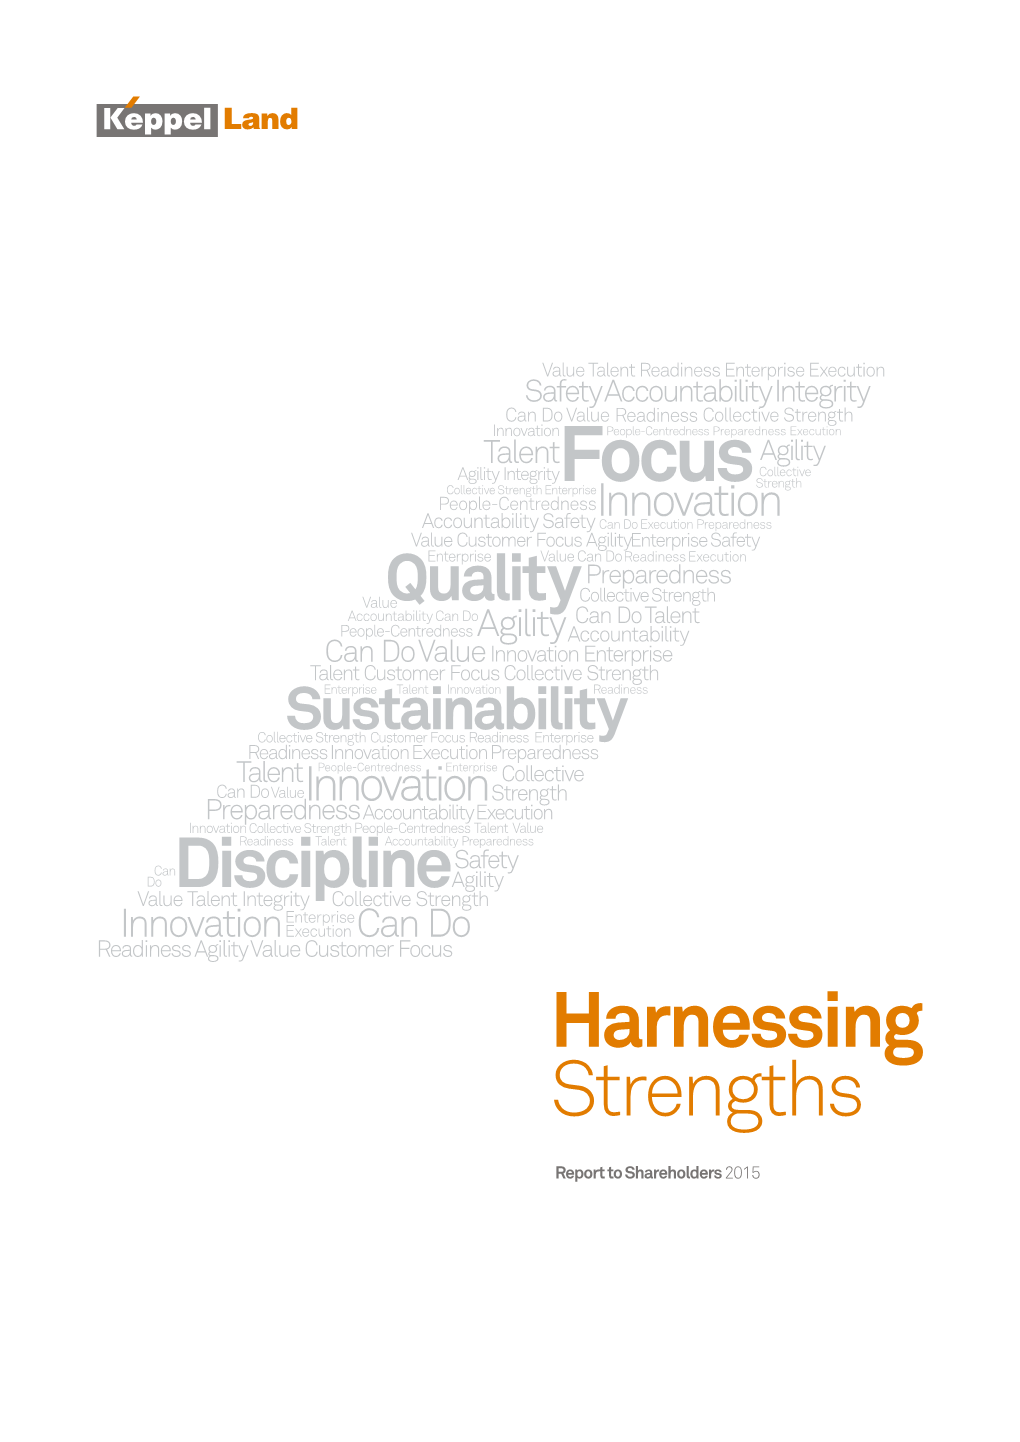 Focus Harnessing Strengths